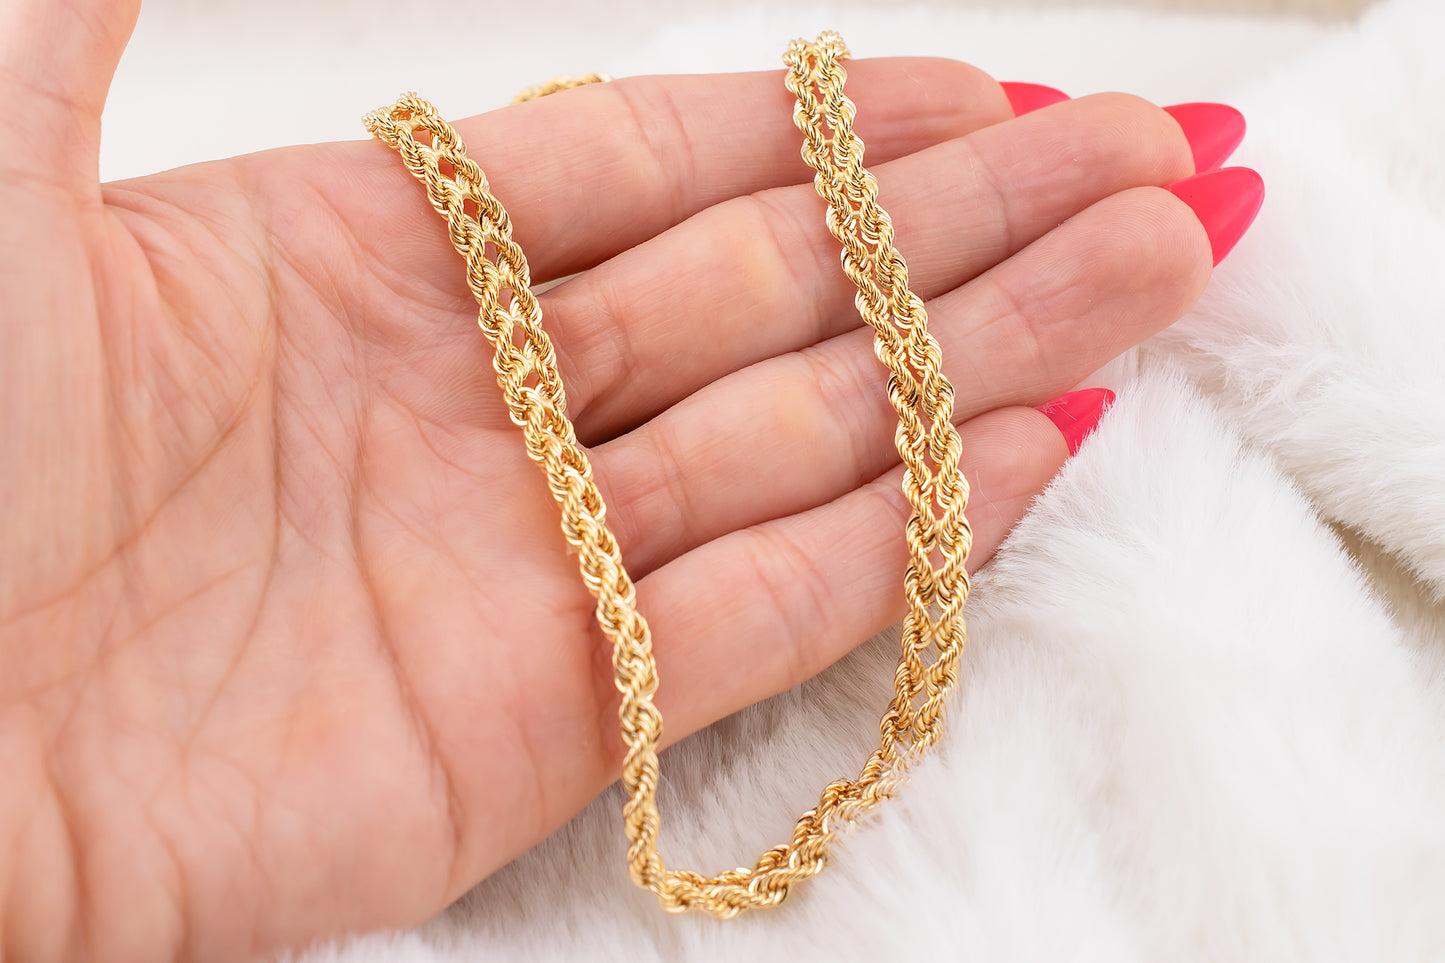 Vintage Estate Unisex 14 Karat Yellow Gold Double Rope Chain Necklace 17.5 Inches Long, 6mm Wide